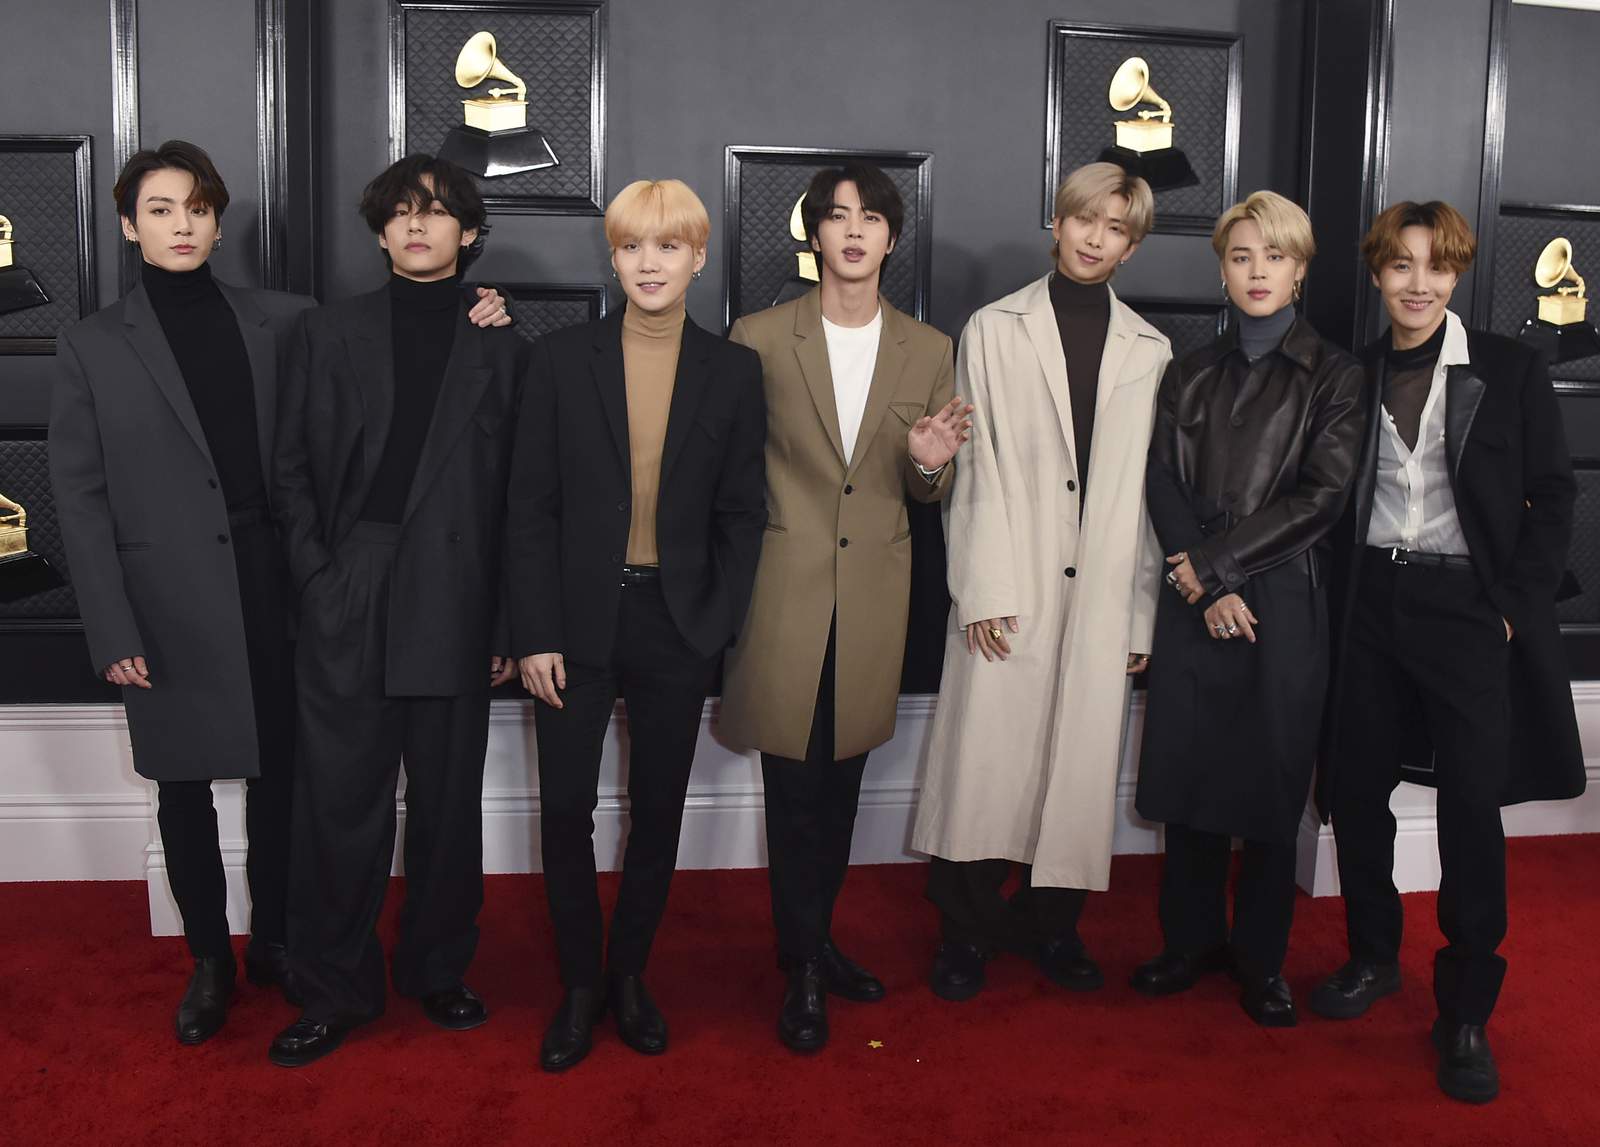 BTS condemns anti-Asian racism, says they've experienced it